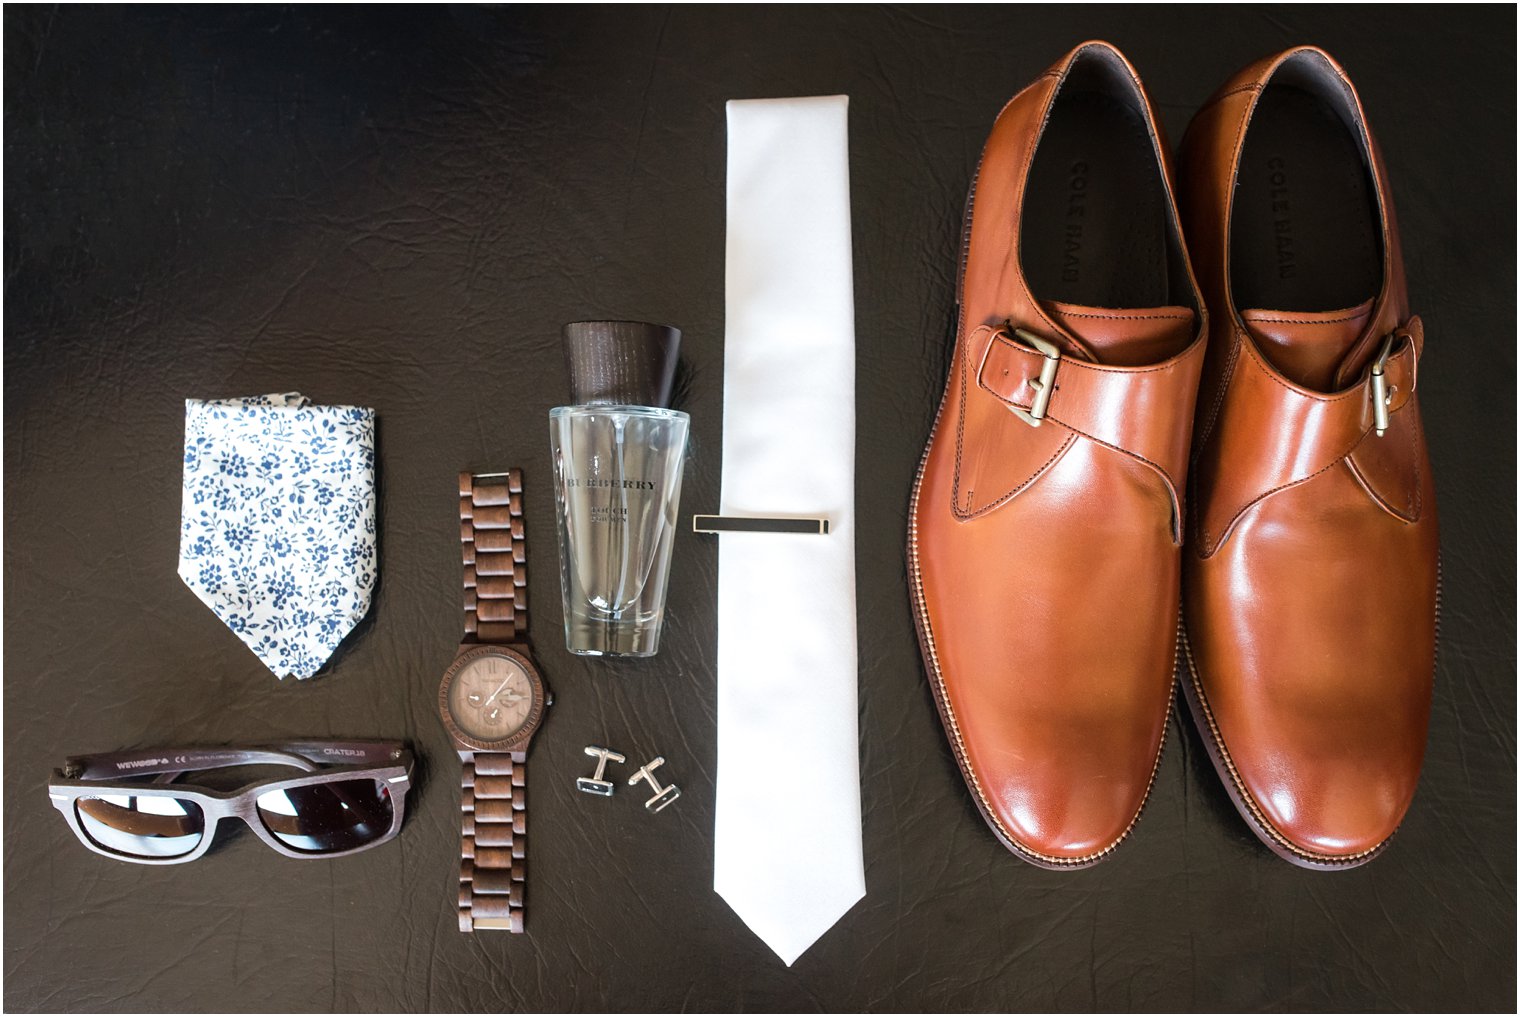 Groom shoes, watch, tie, and cologne